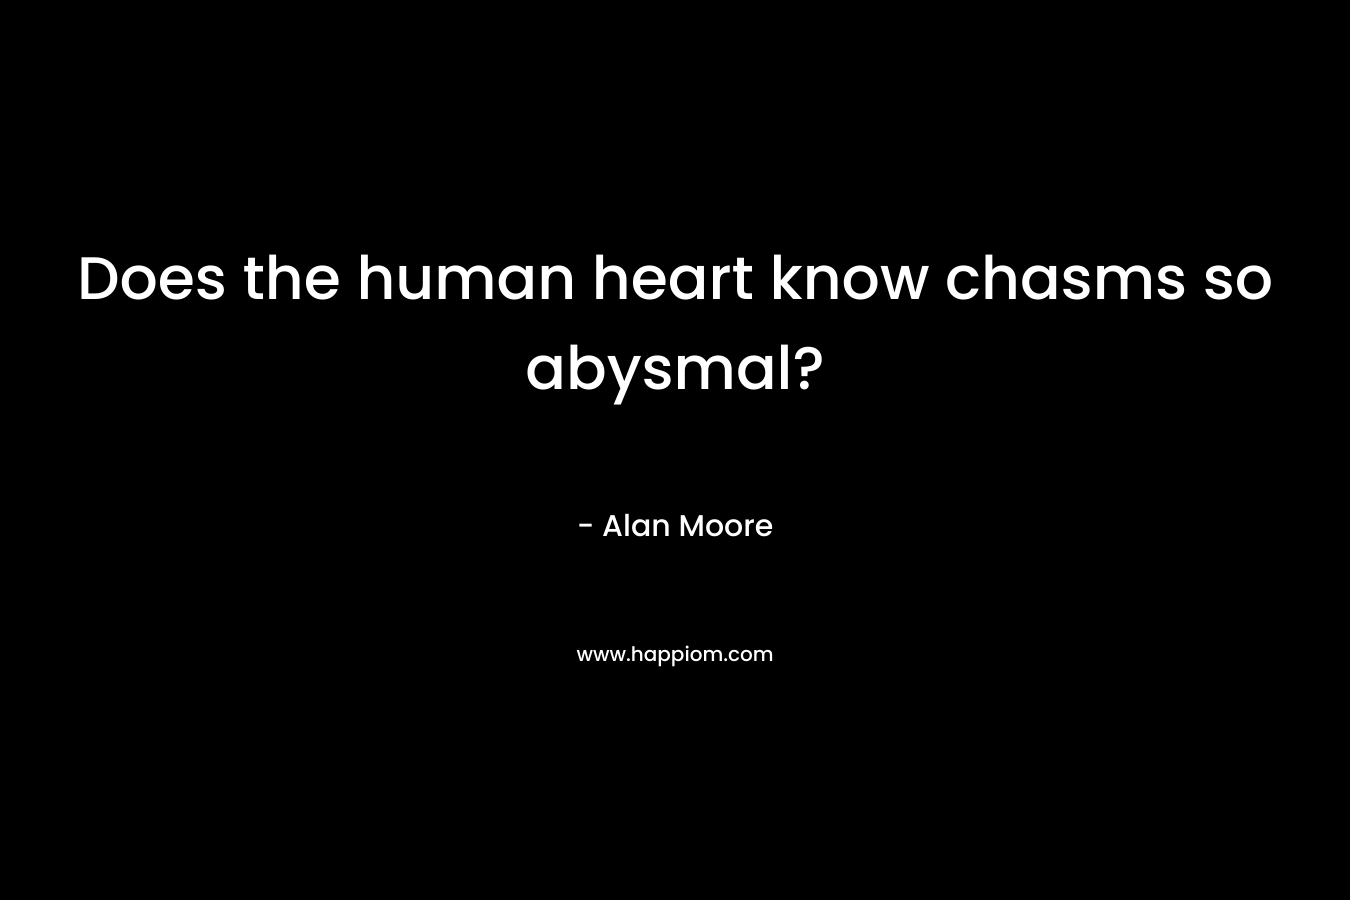 Does the human heart know chasms so abysmal?